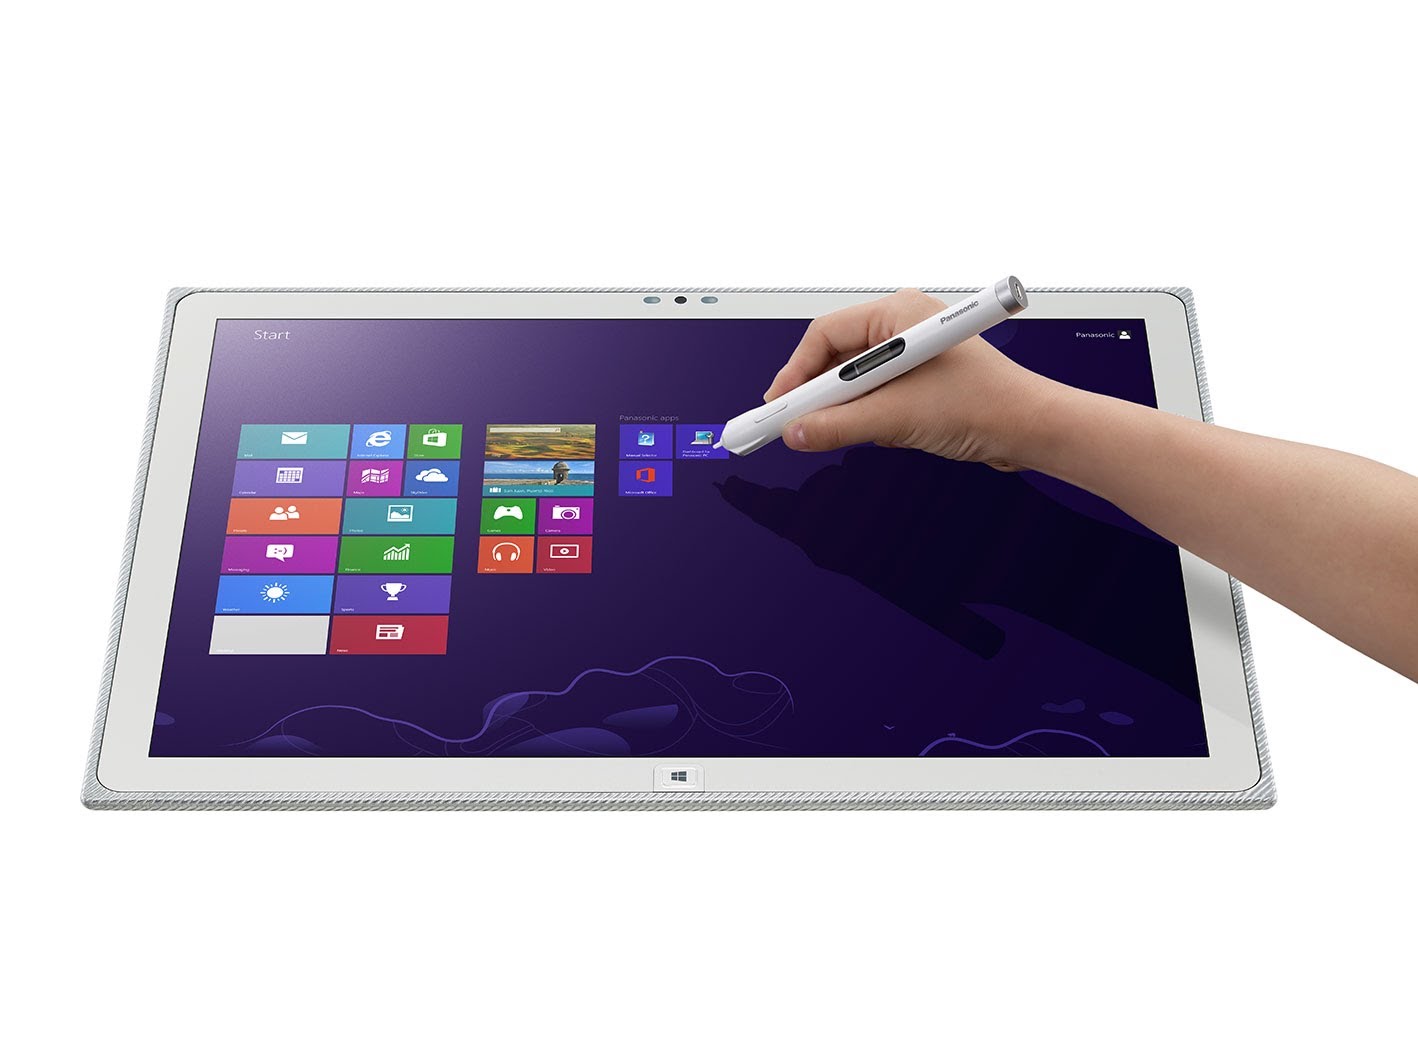 drawing tablets for chief architect software